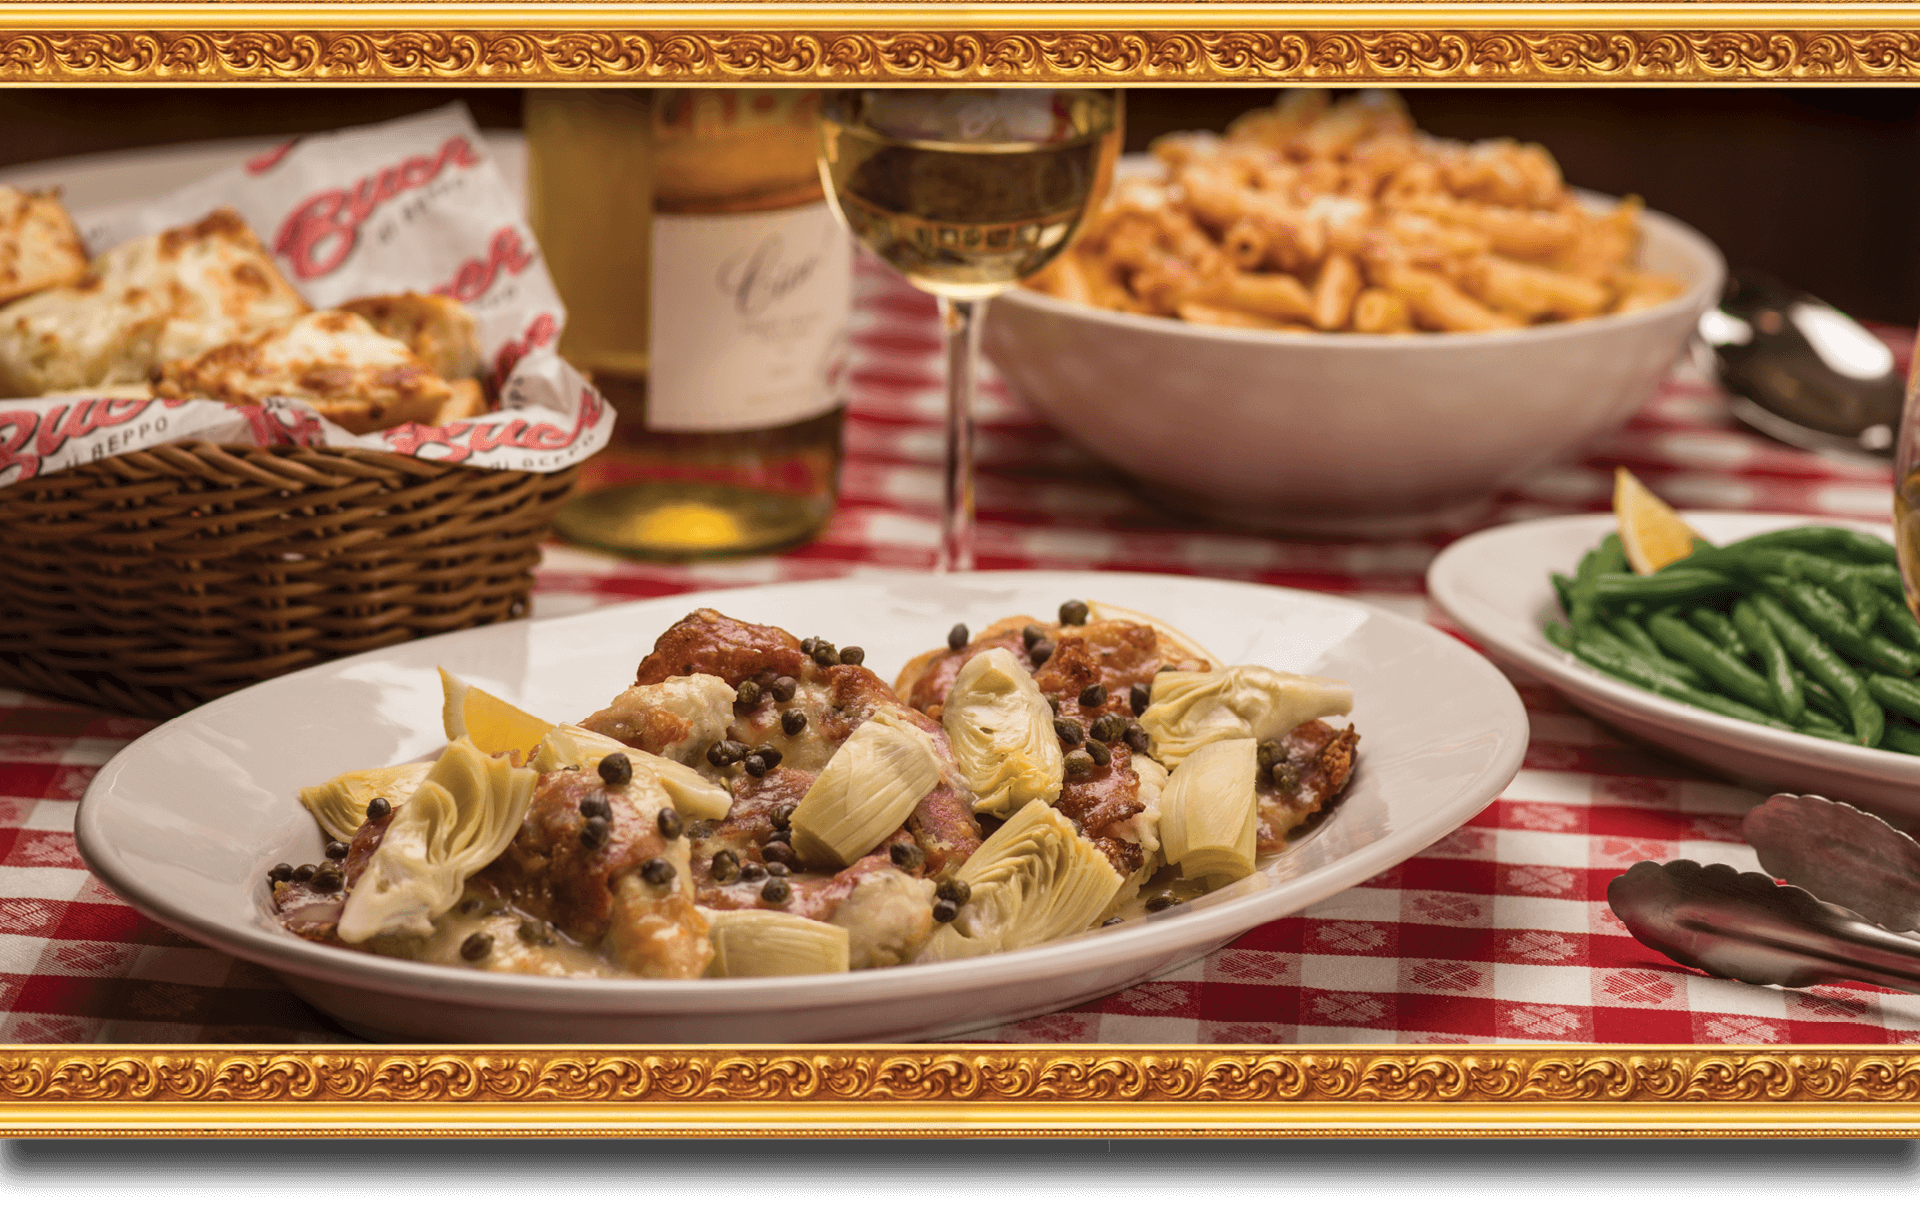 Nutritional information for Buca di Beppo